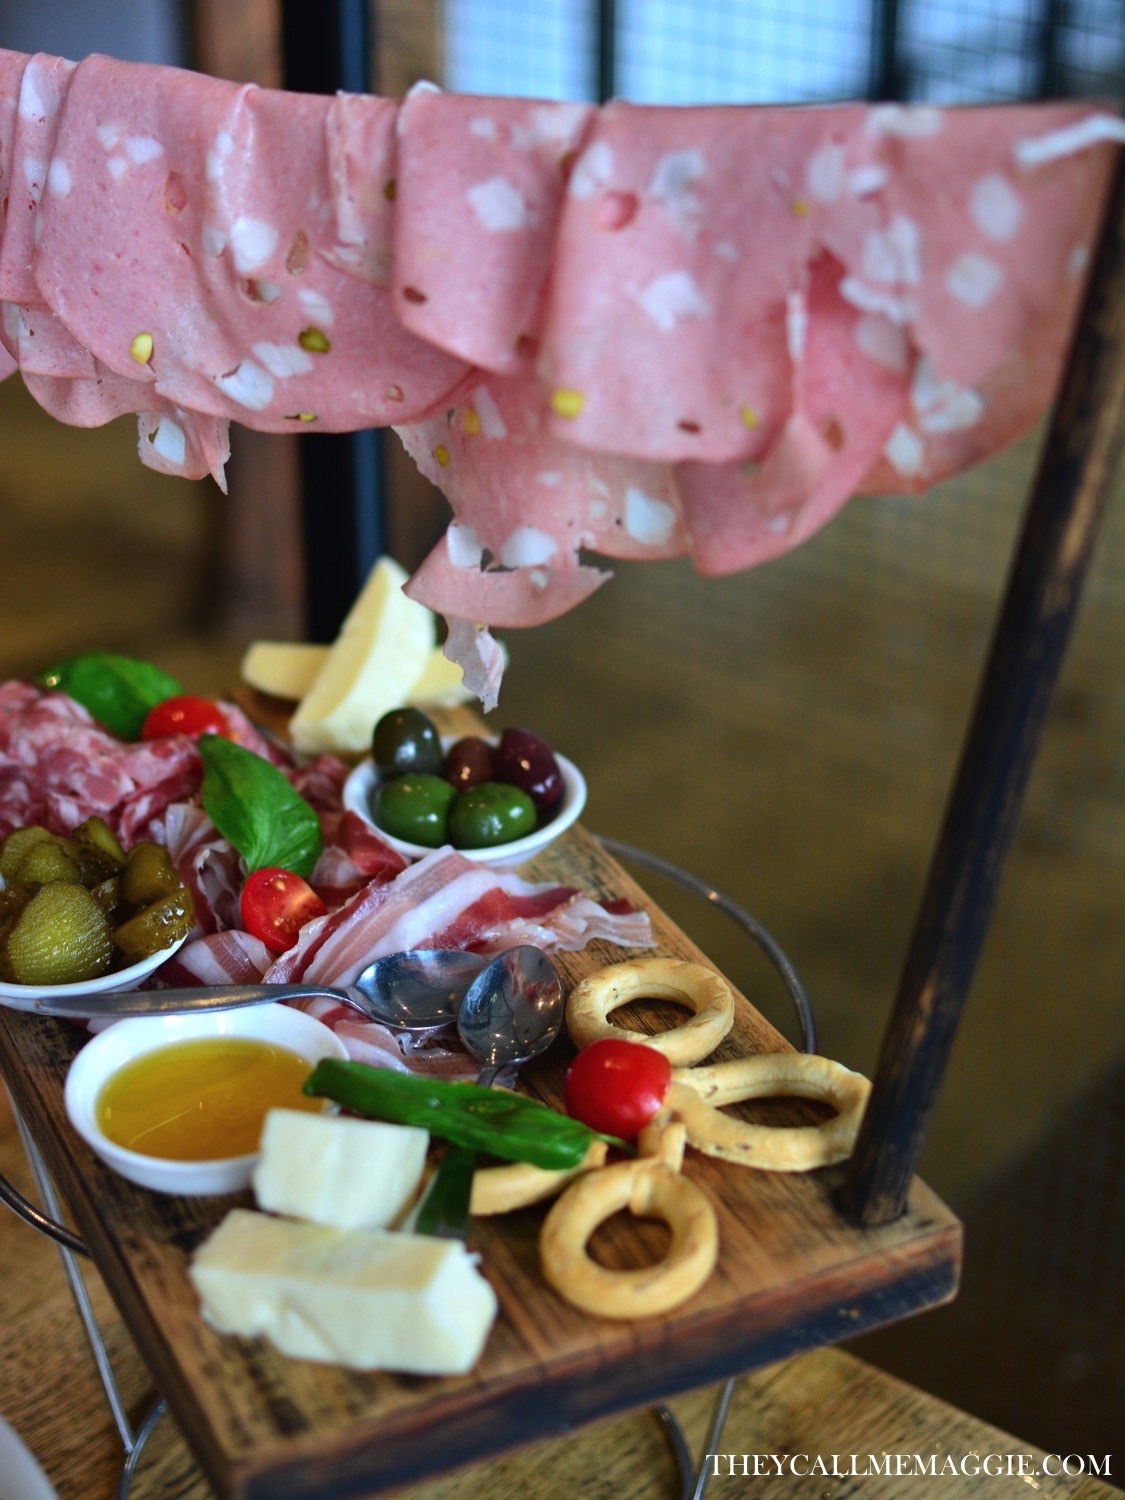  Degustazione mista - a selection of Italian cured meats and cheeses 